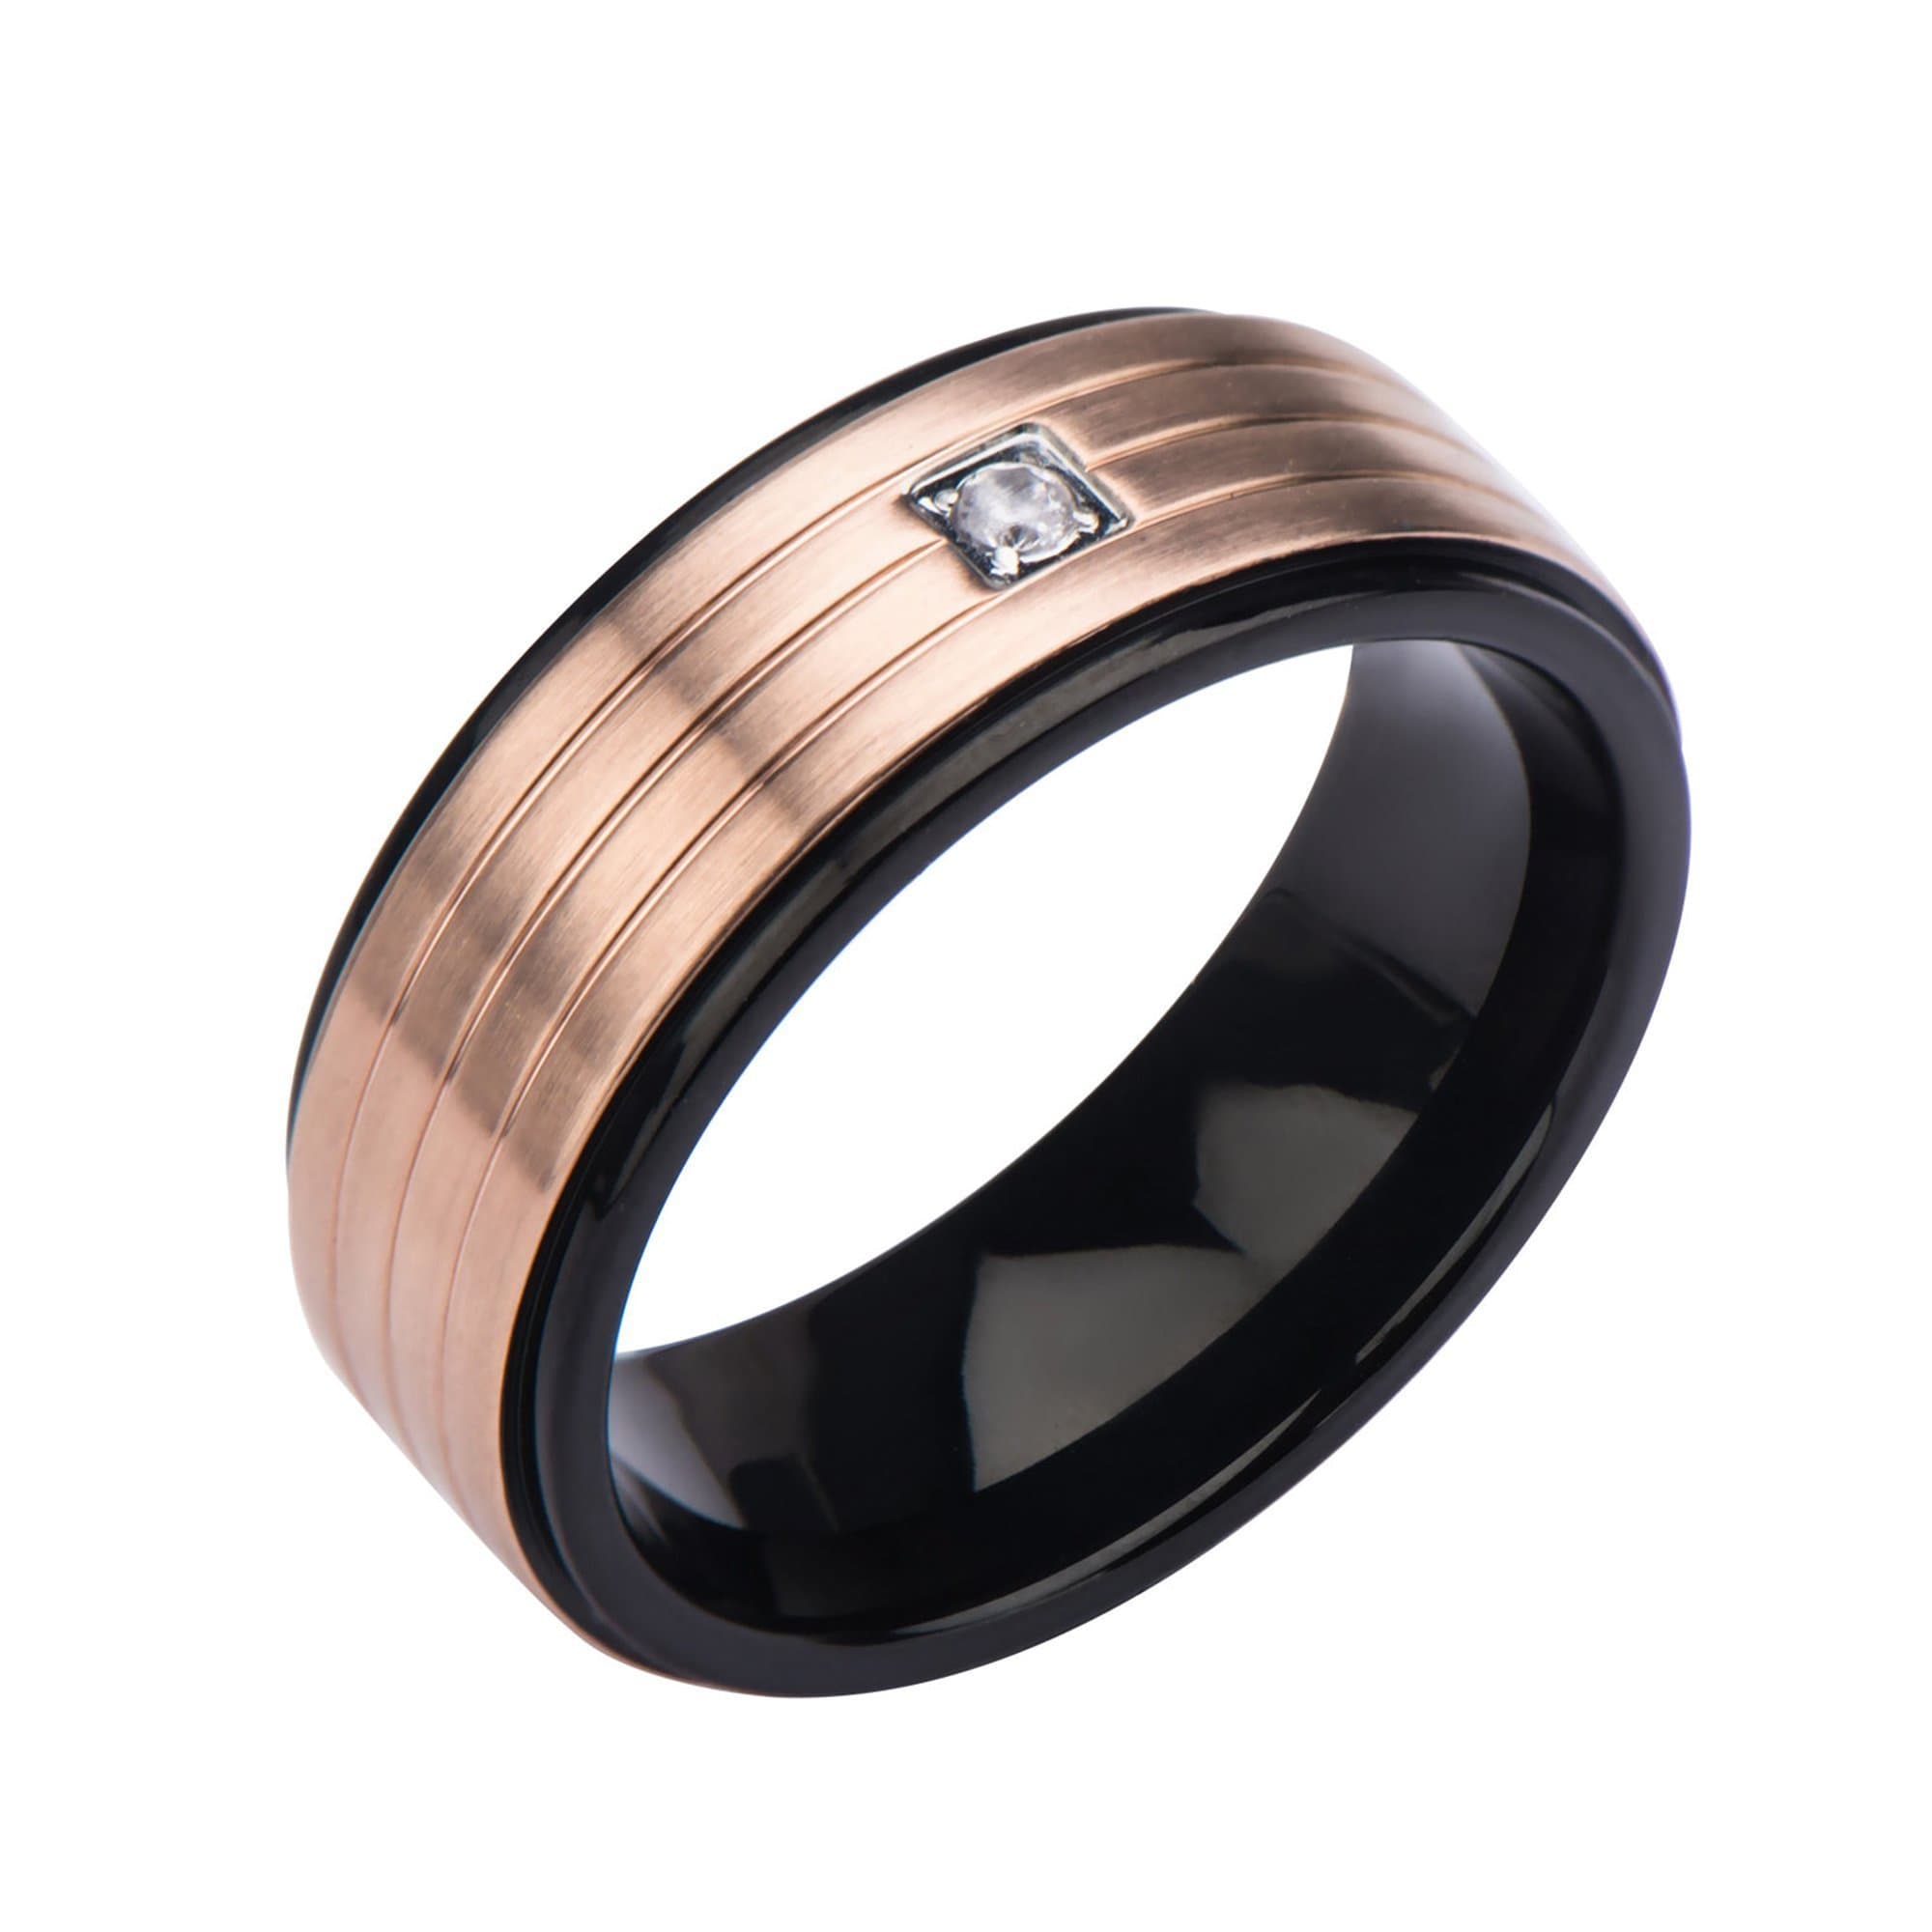 INOX JEWELRY Rings Black and Rose Stainless Steel Triple Lined with CZ Band Ring